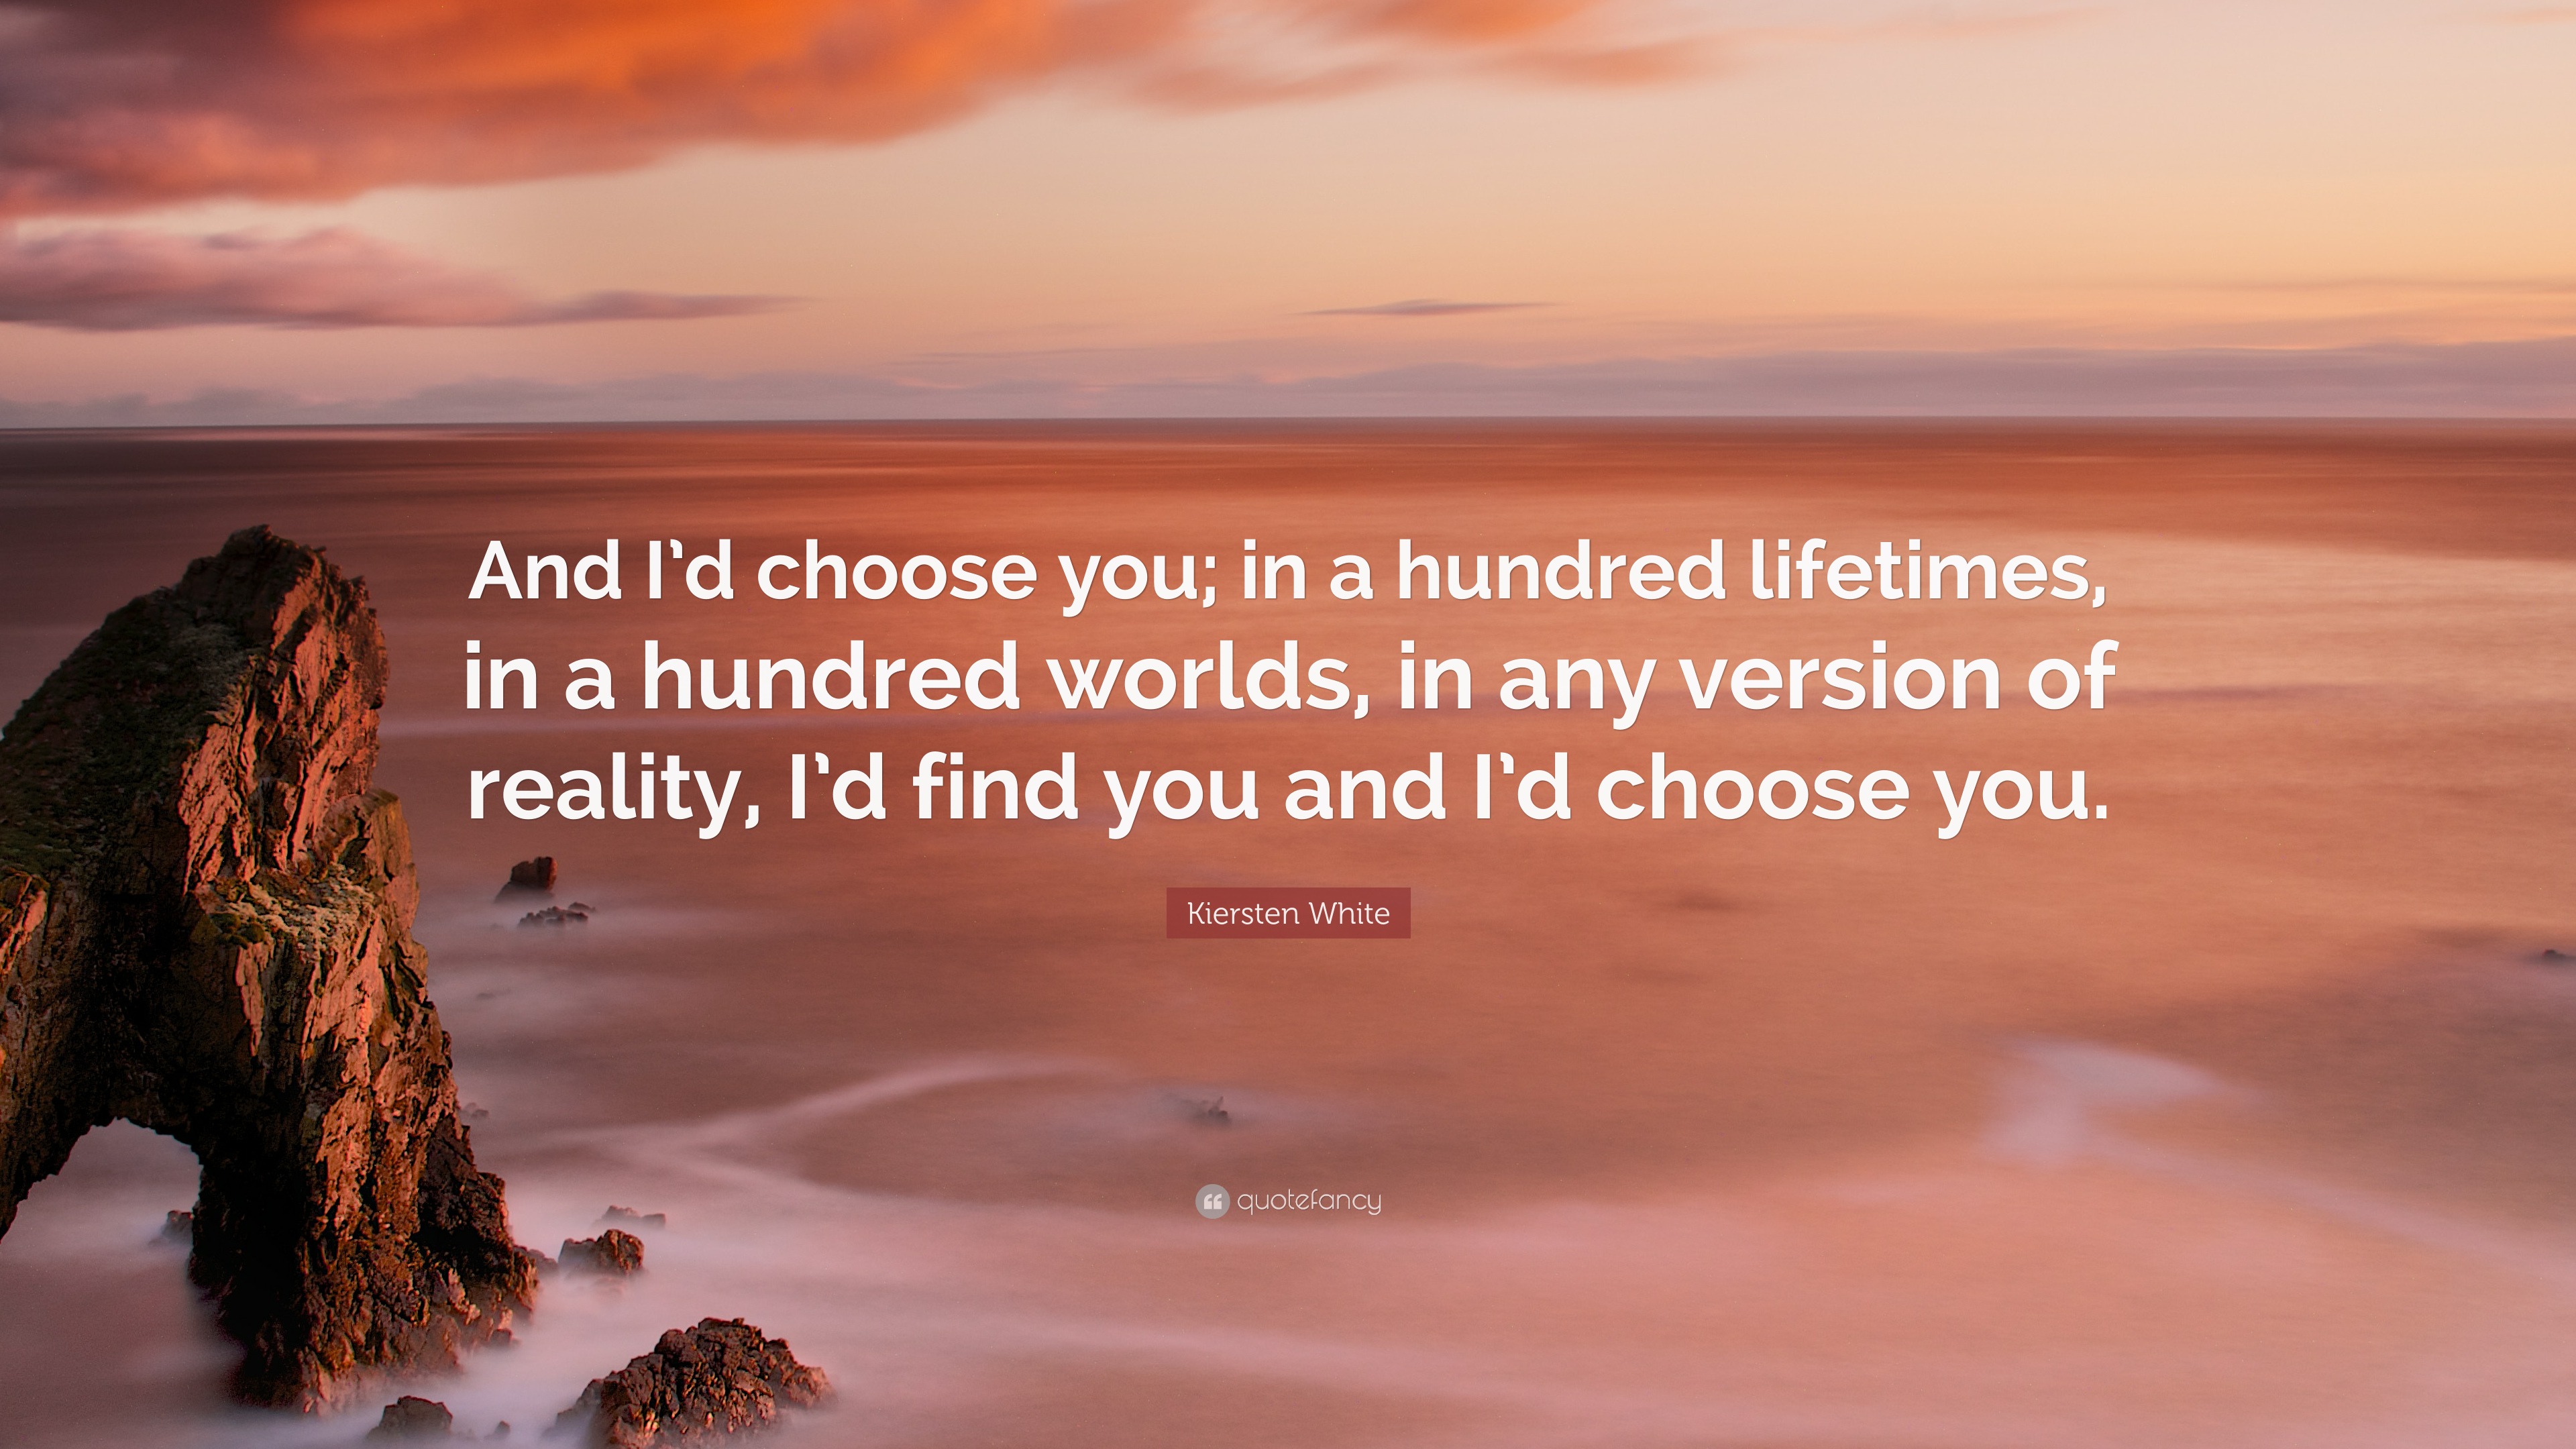 Kiersten White Quote: "And I'd choose you; in a hundred lifetimes, in a hundred worlds, in any ...